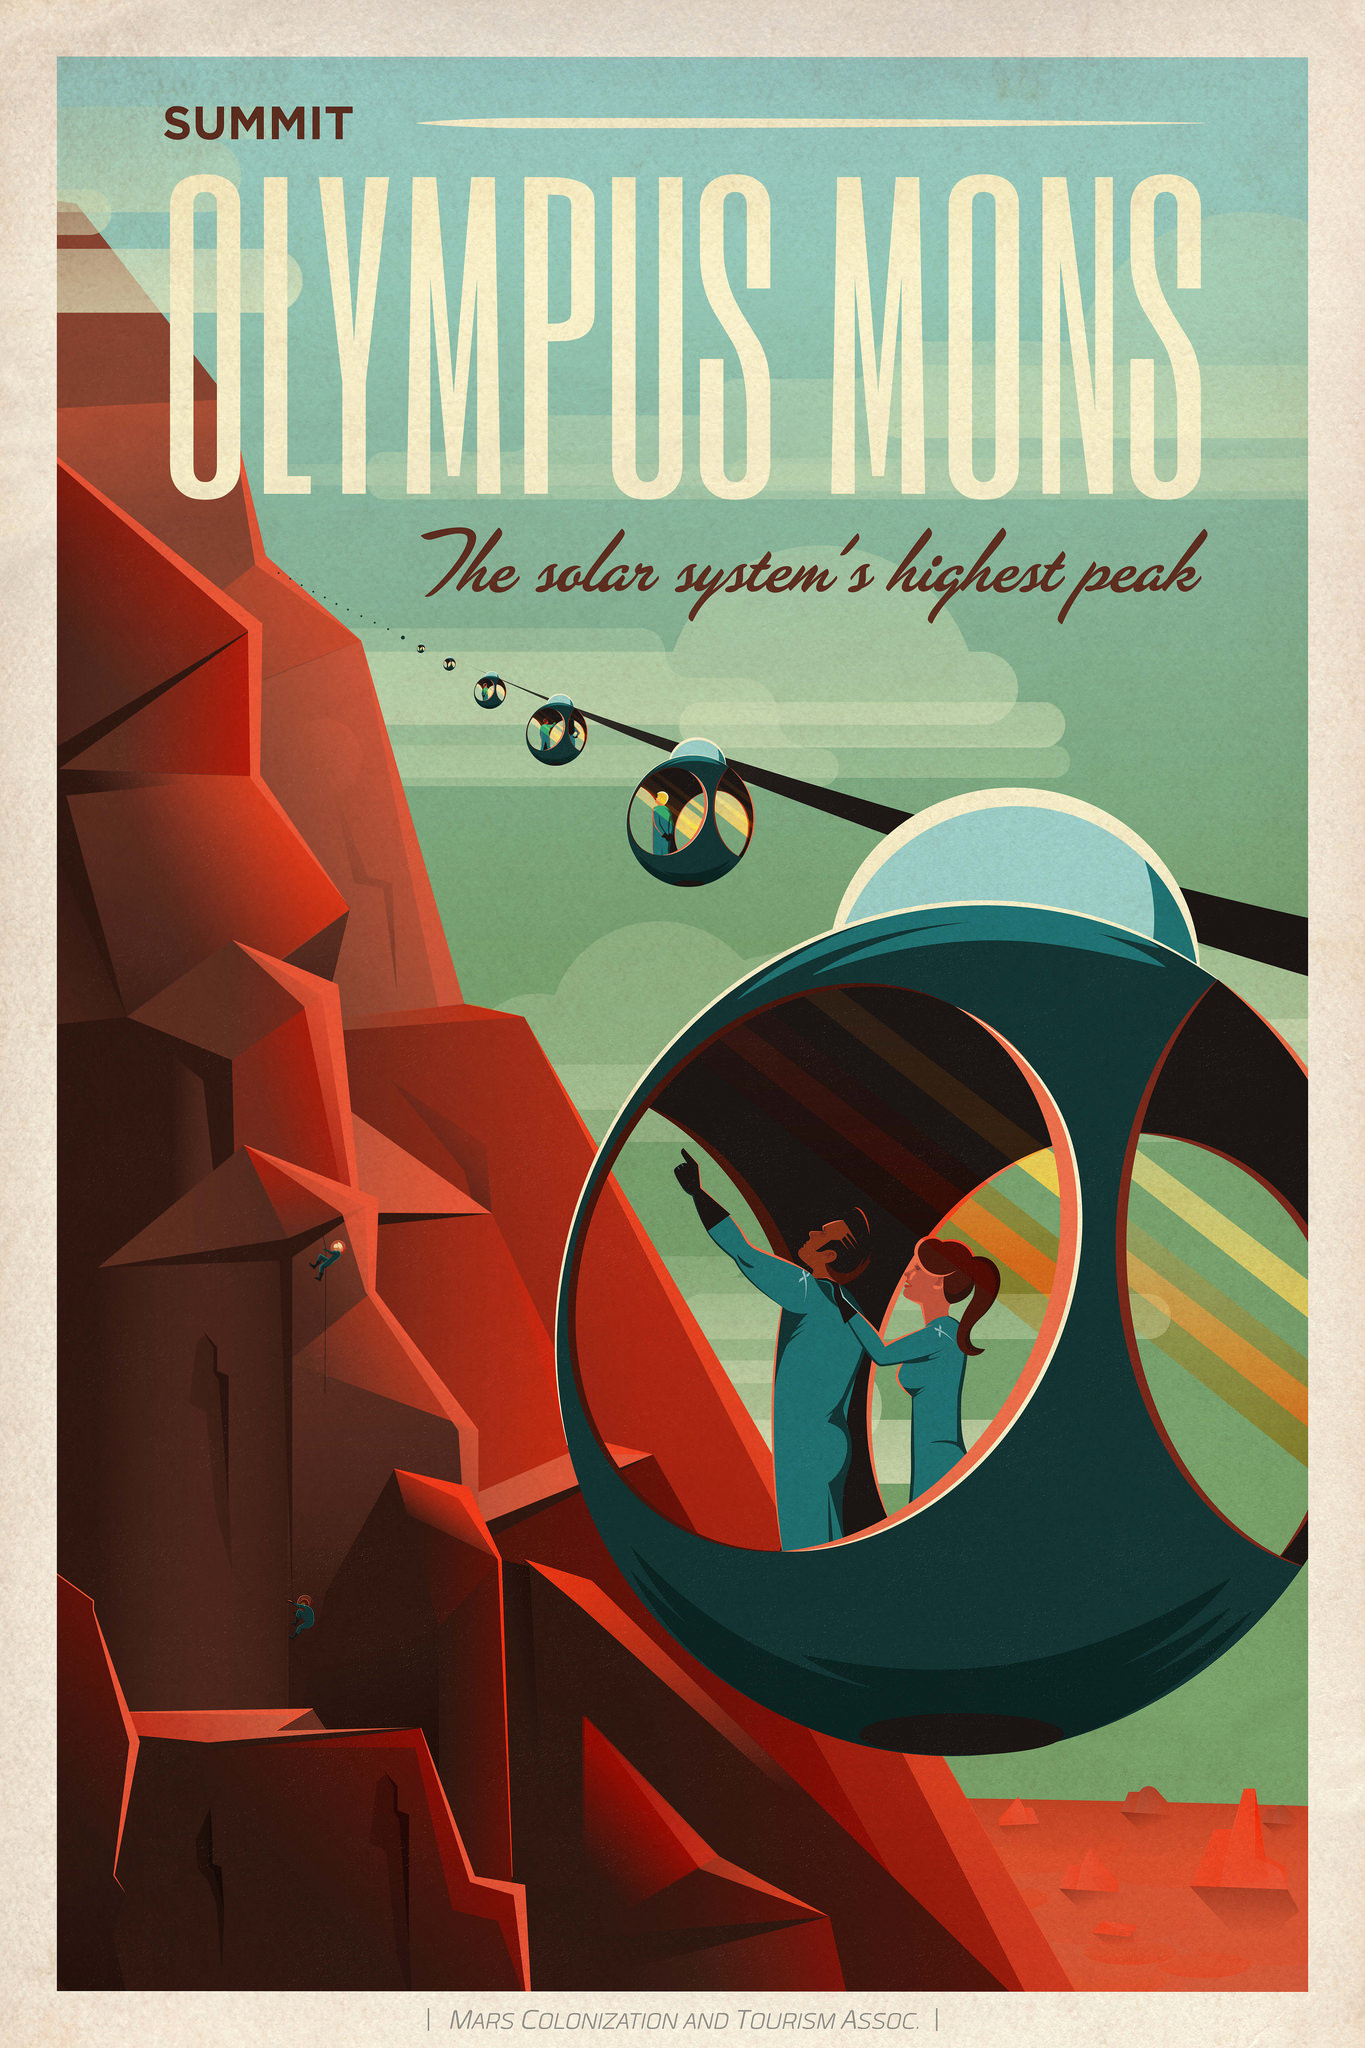 SpaceX Just Dropped These Amazing Retro Mars Travel Posters